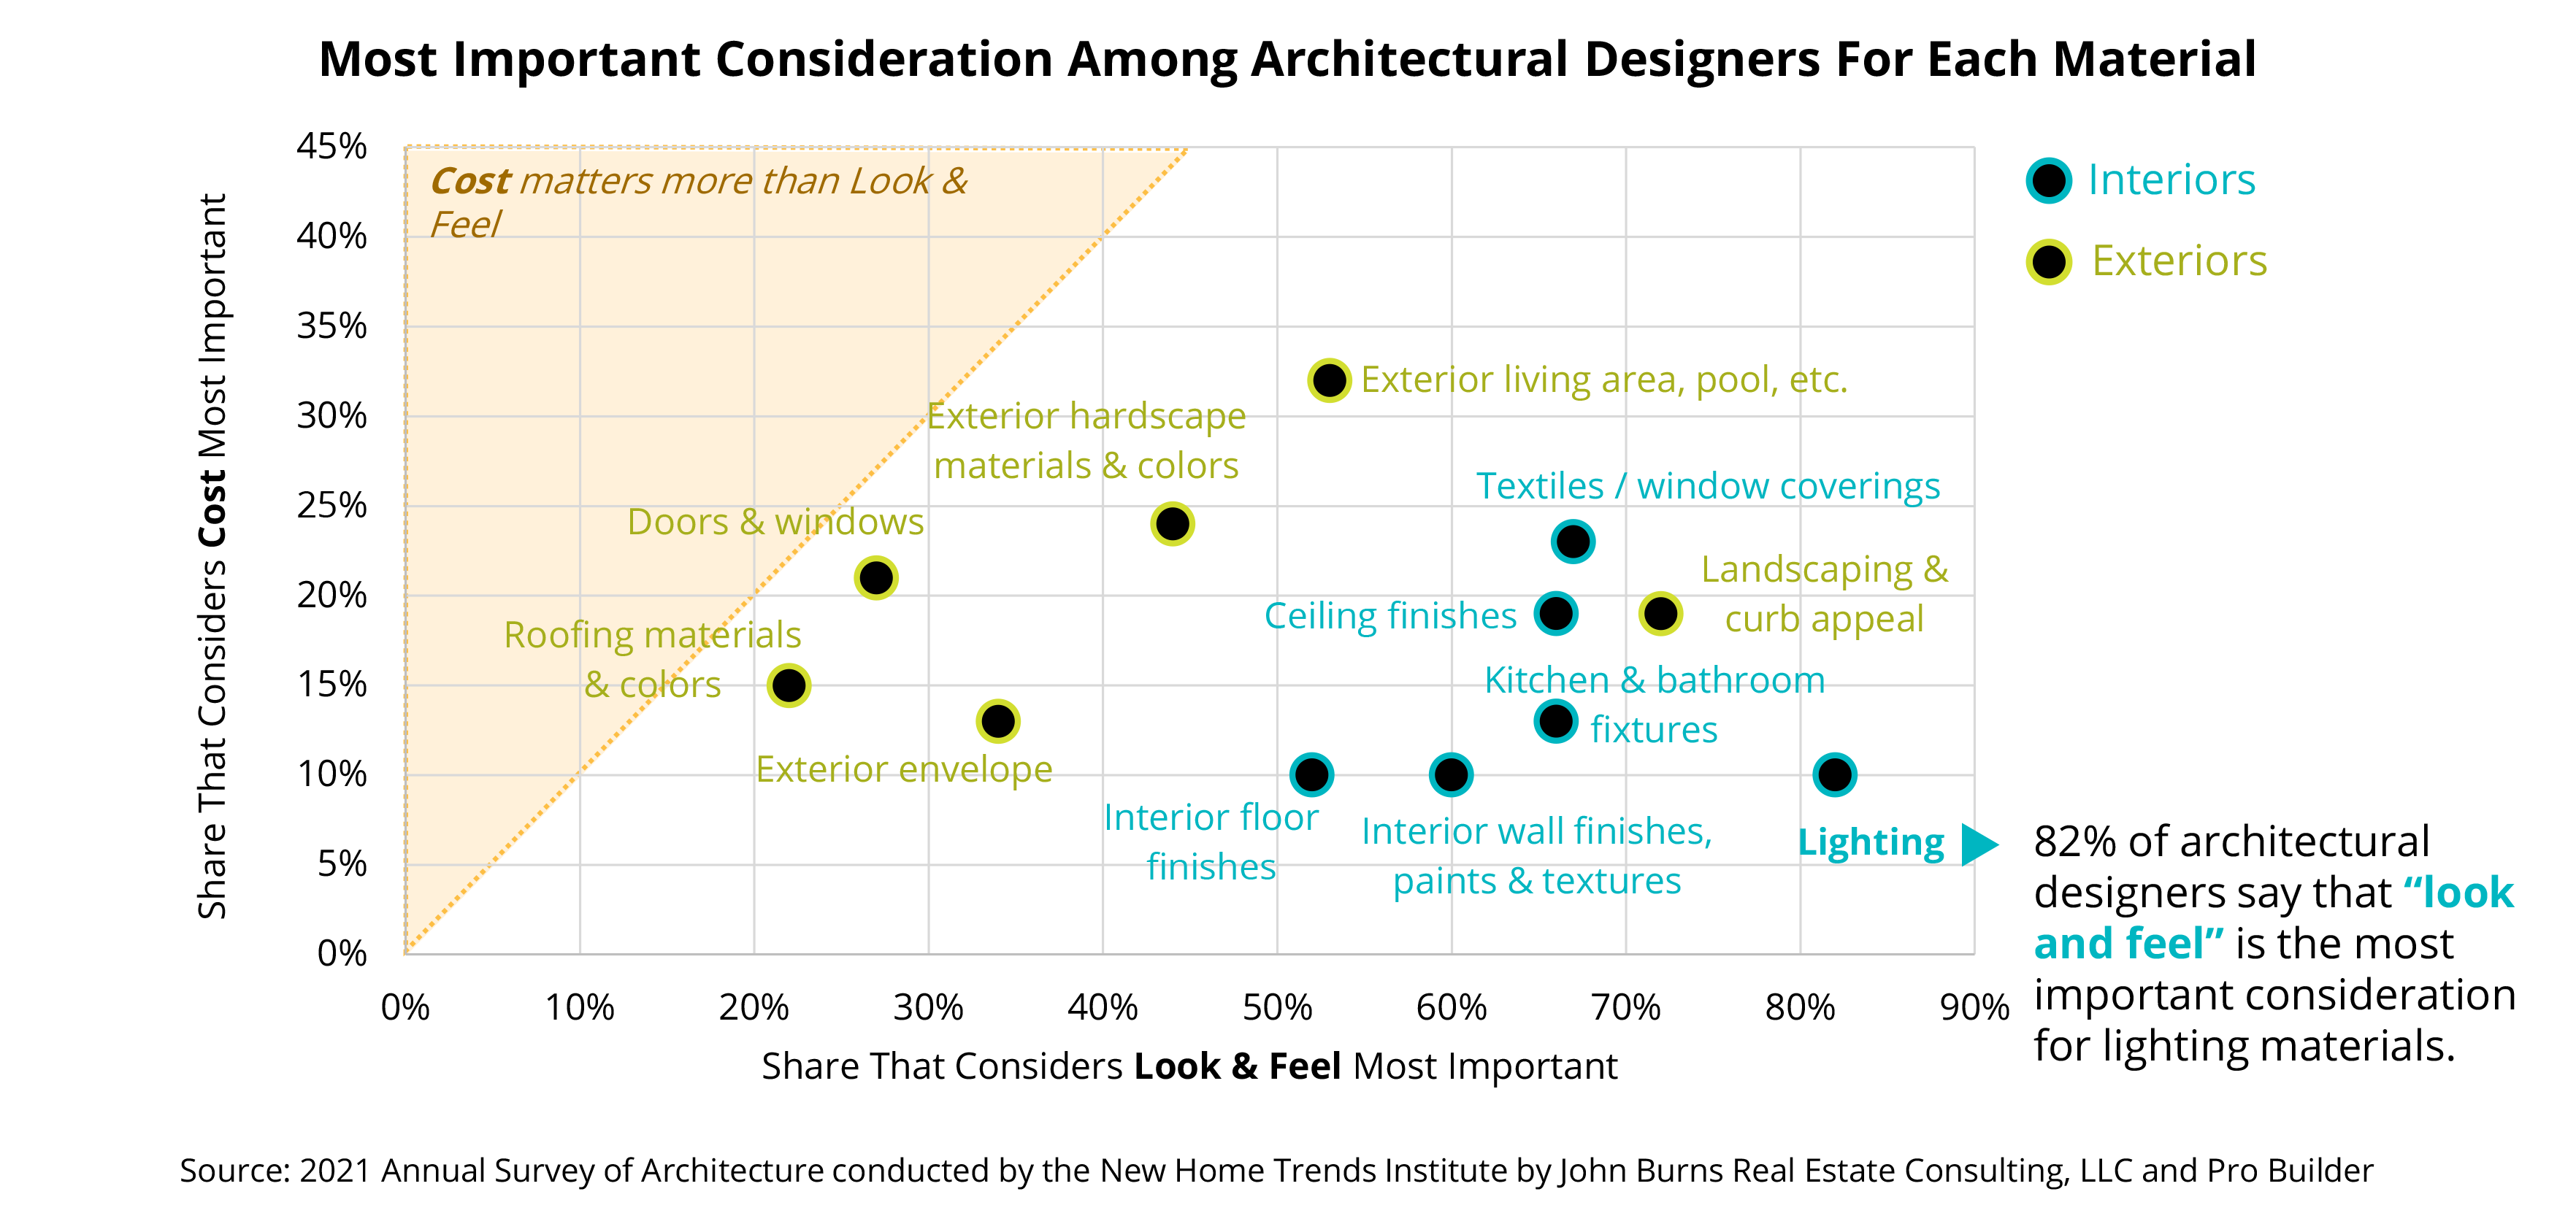 Most important consideration among architectural designers for each material